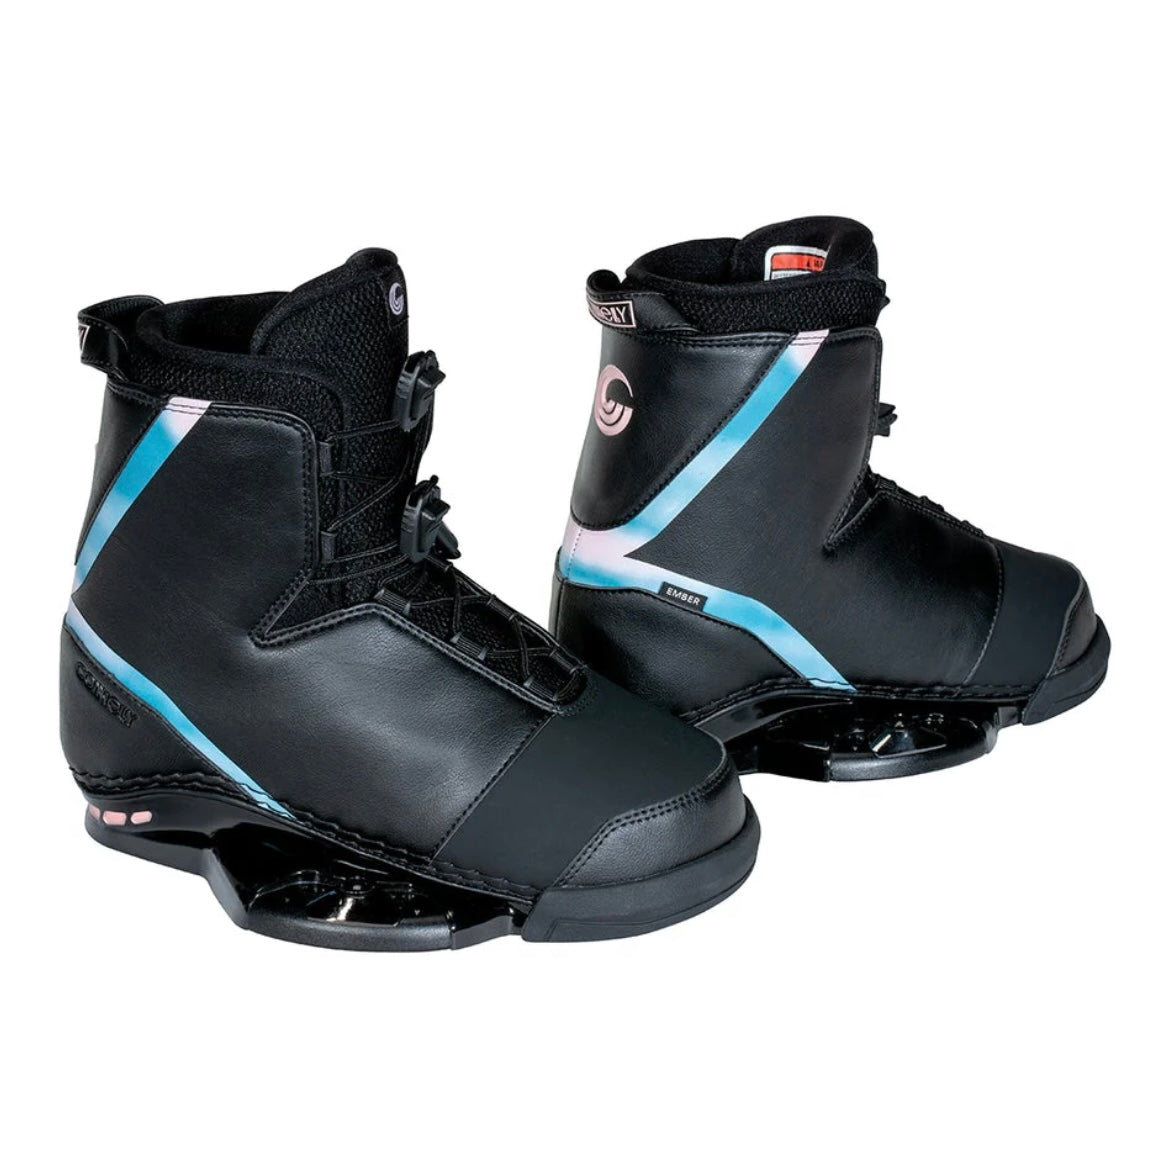 Connelly Wild Child 131 w/ Ember Bindings